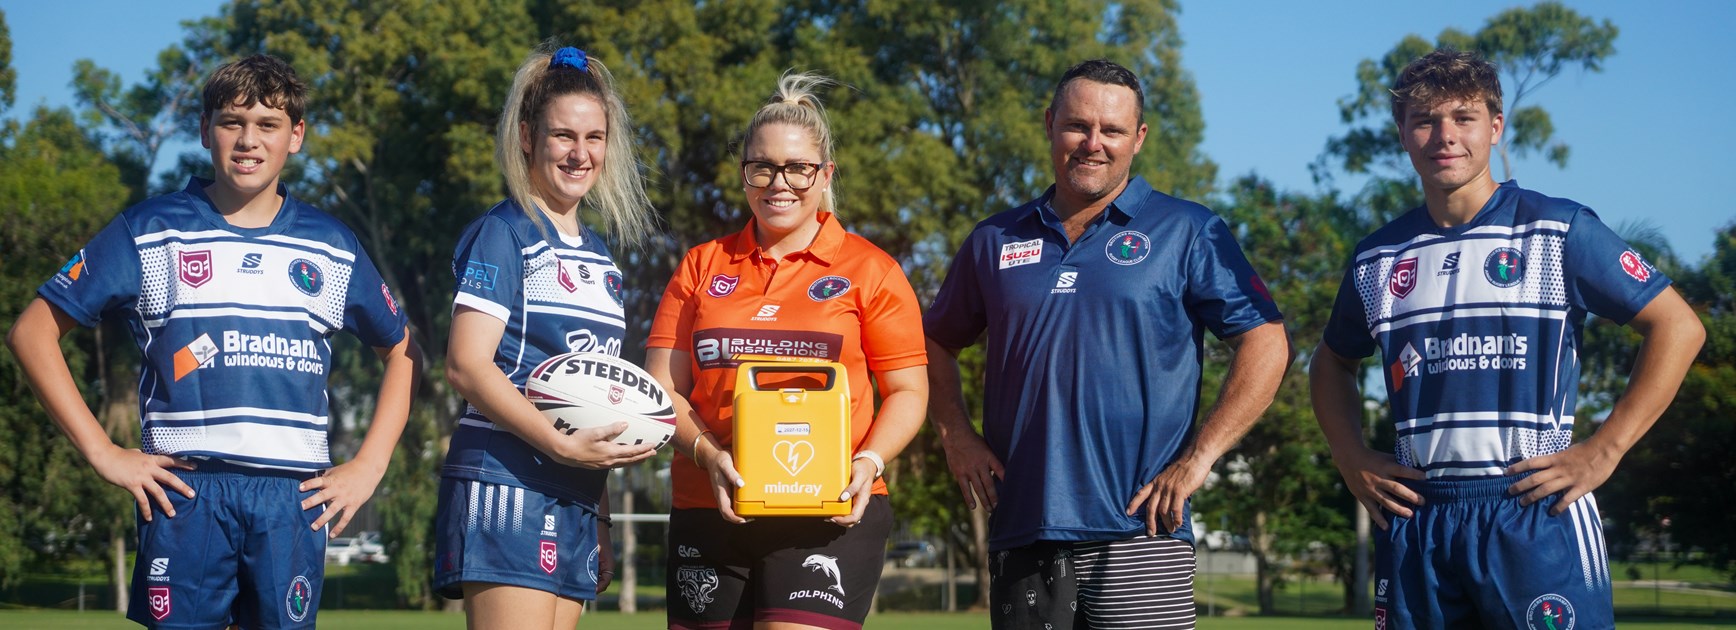 'Could happen to anyone': Alpha Sport defibrillator grant helping equip clubs